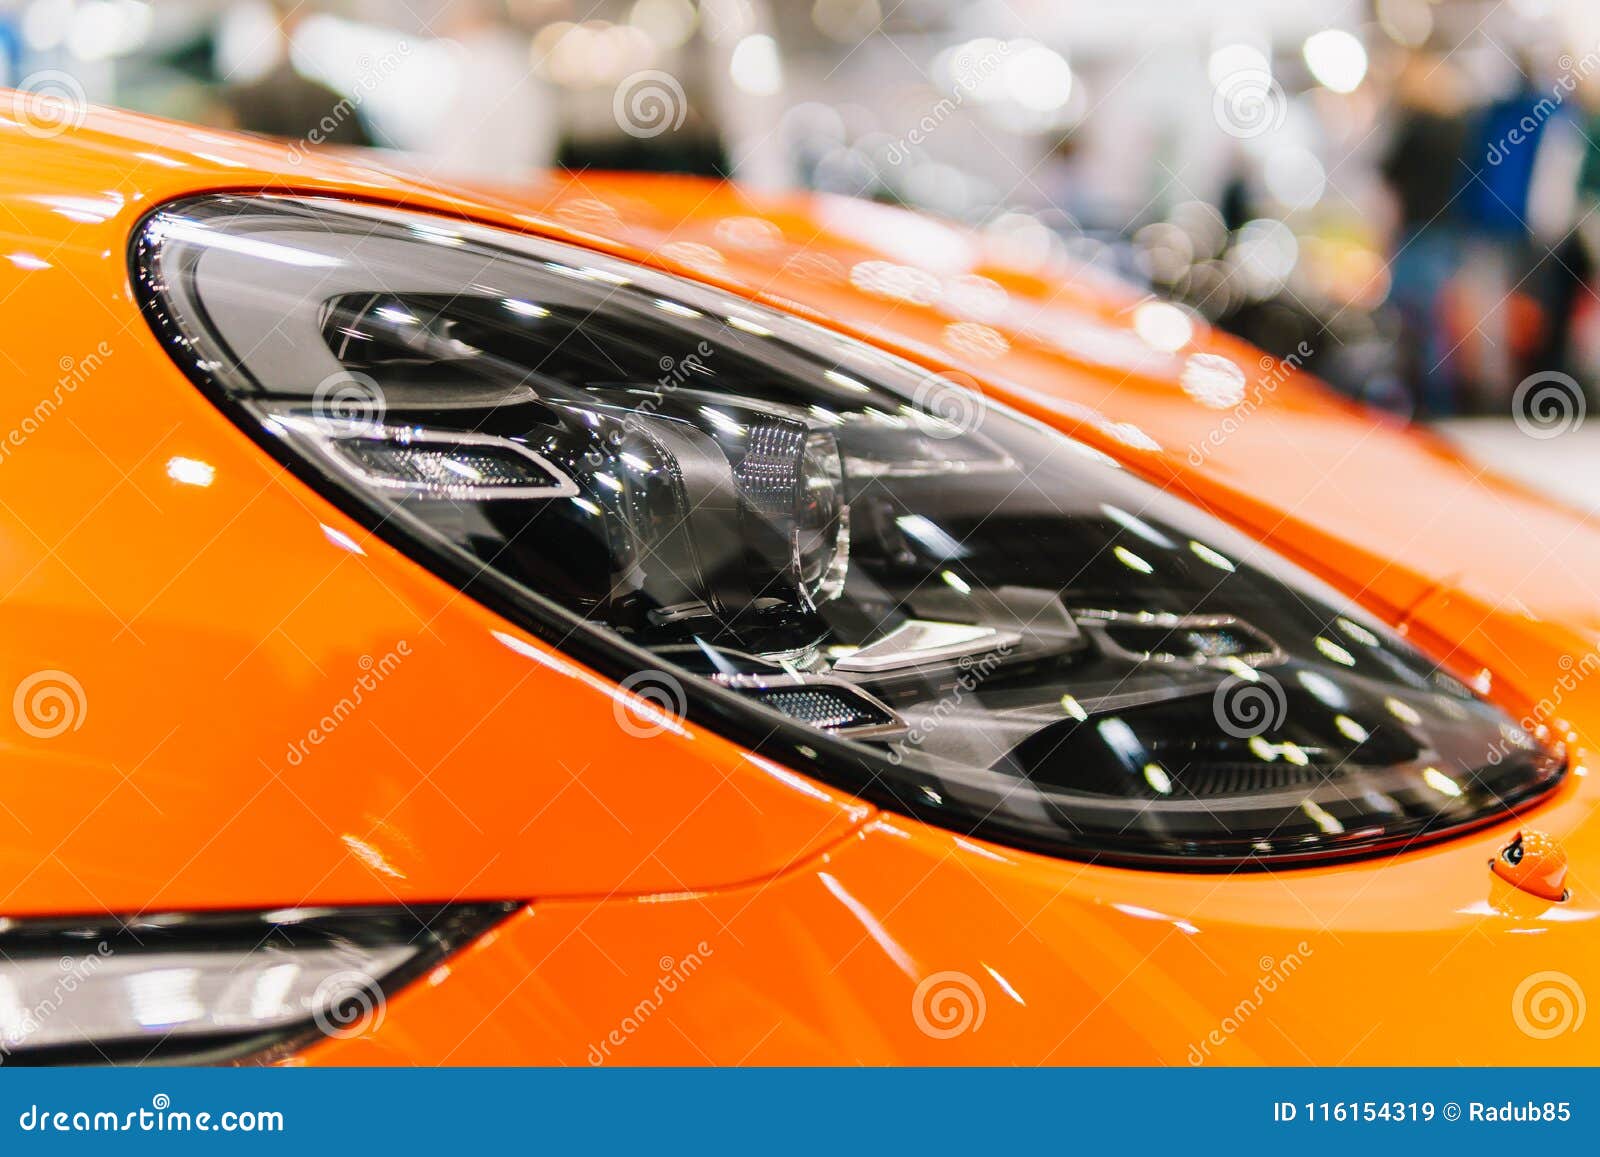 Head Lights of Sports Car stock image. Image of detail - 116154319